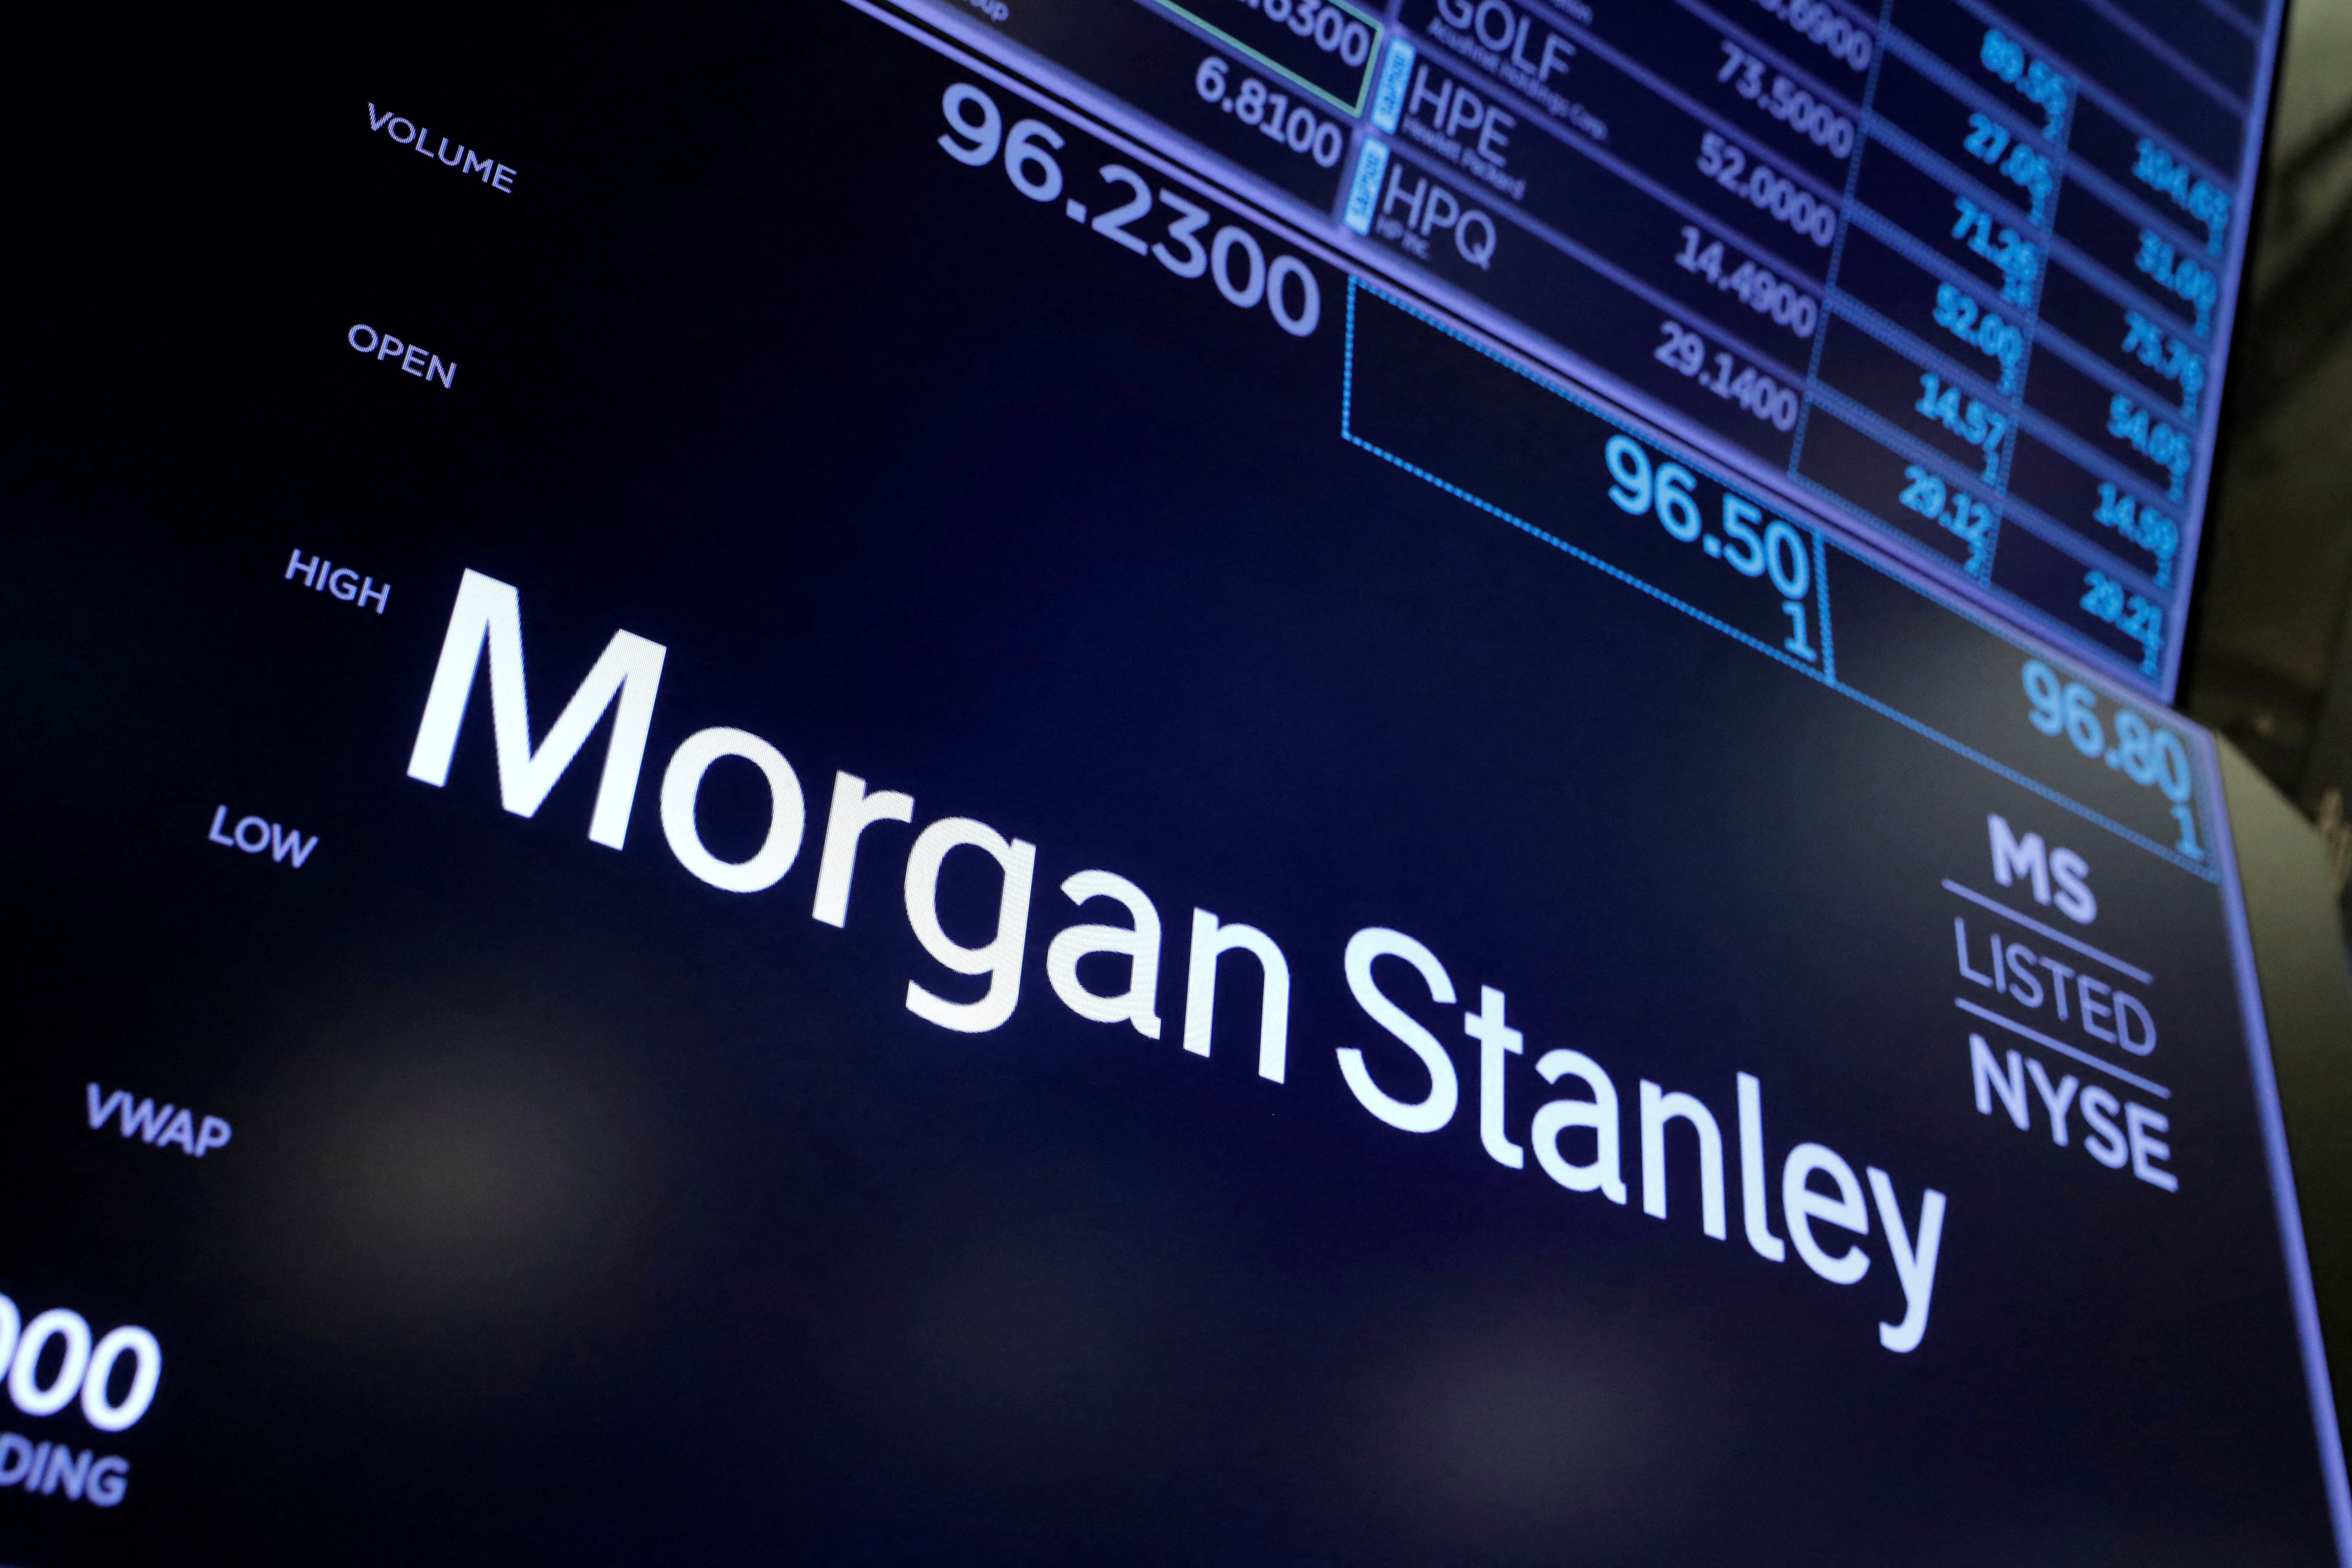 The logo for Morgan Stanley is seen on the trading floor at the New York Stock Exchange in New York City on August 3, 2021. Photo: Reuters